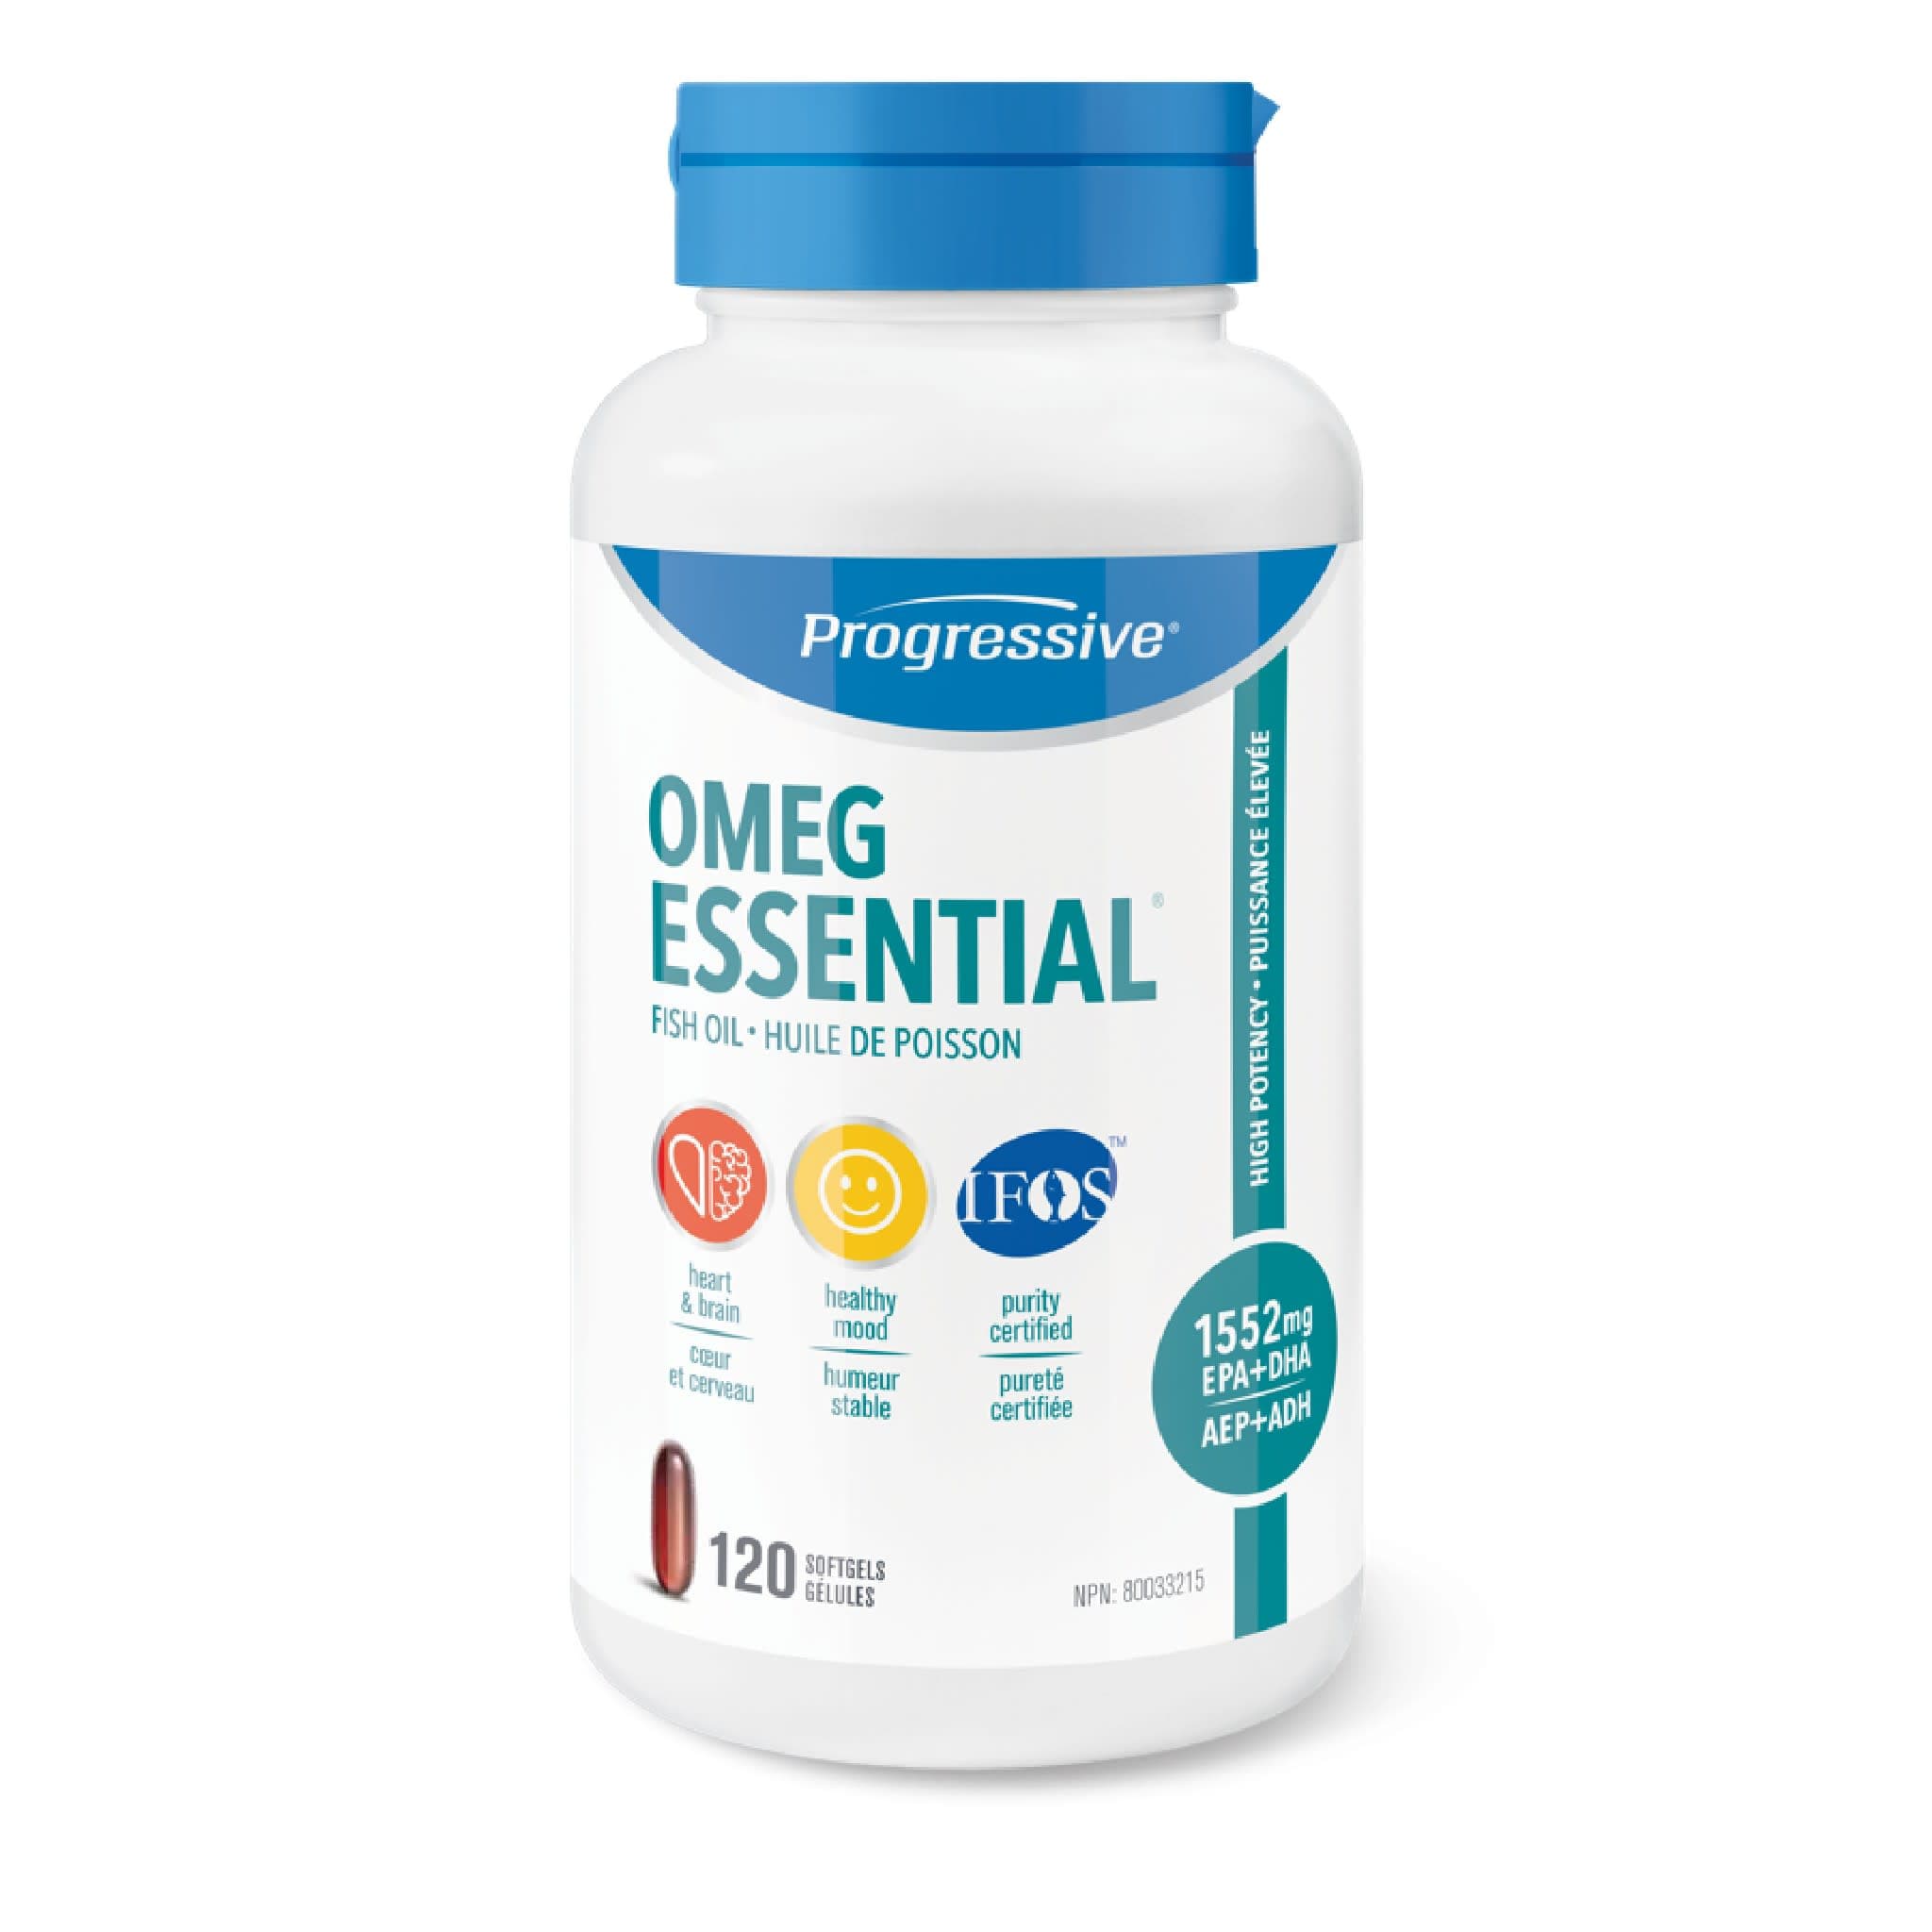 Progressive OmegEssential 120 softgels | HERC'S Nutrition Canada